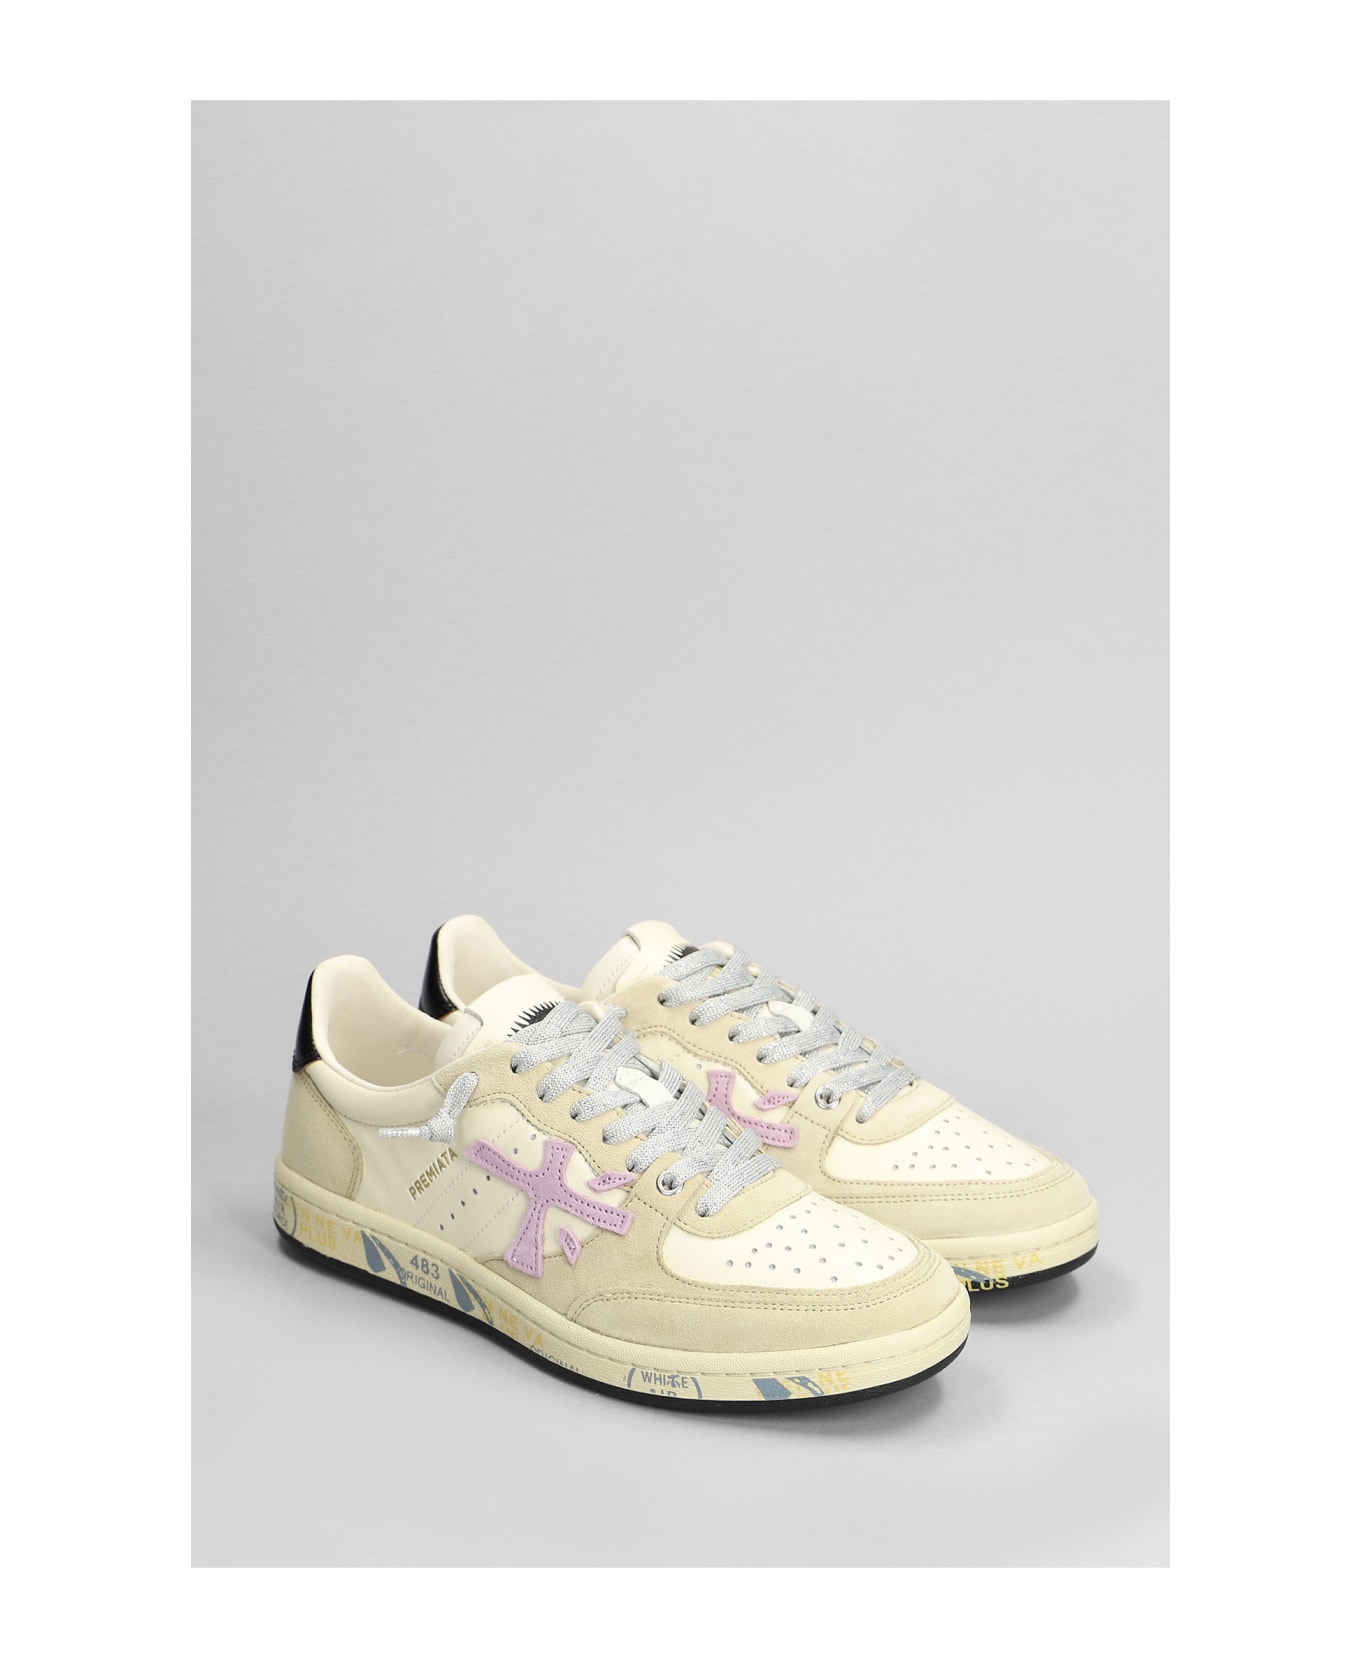 Premiata Bskt Clay Sneakers In Beige Suede And Leather スニーカー